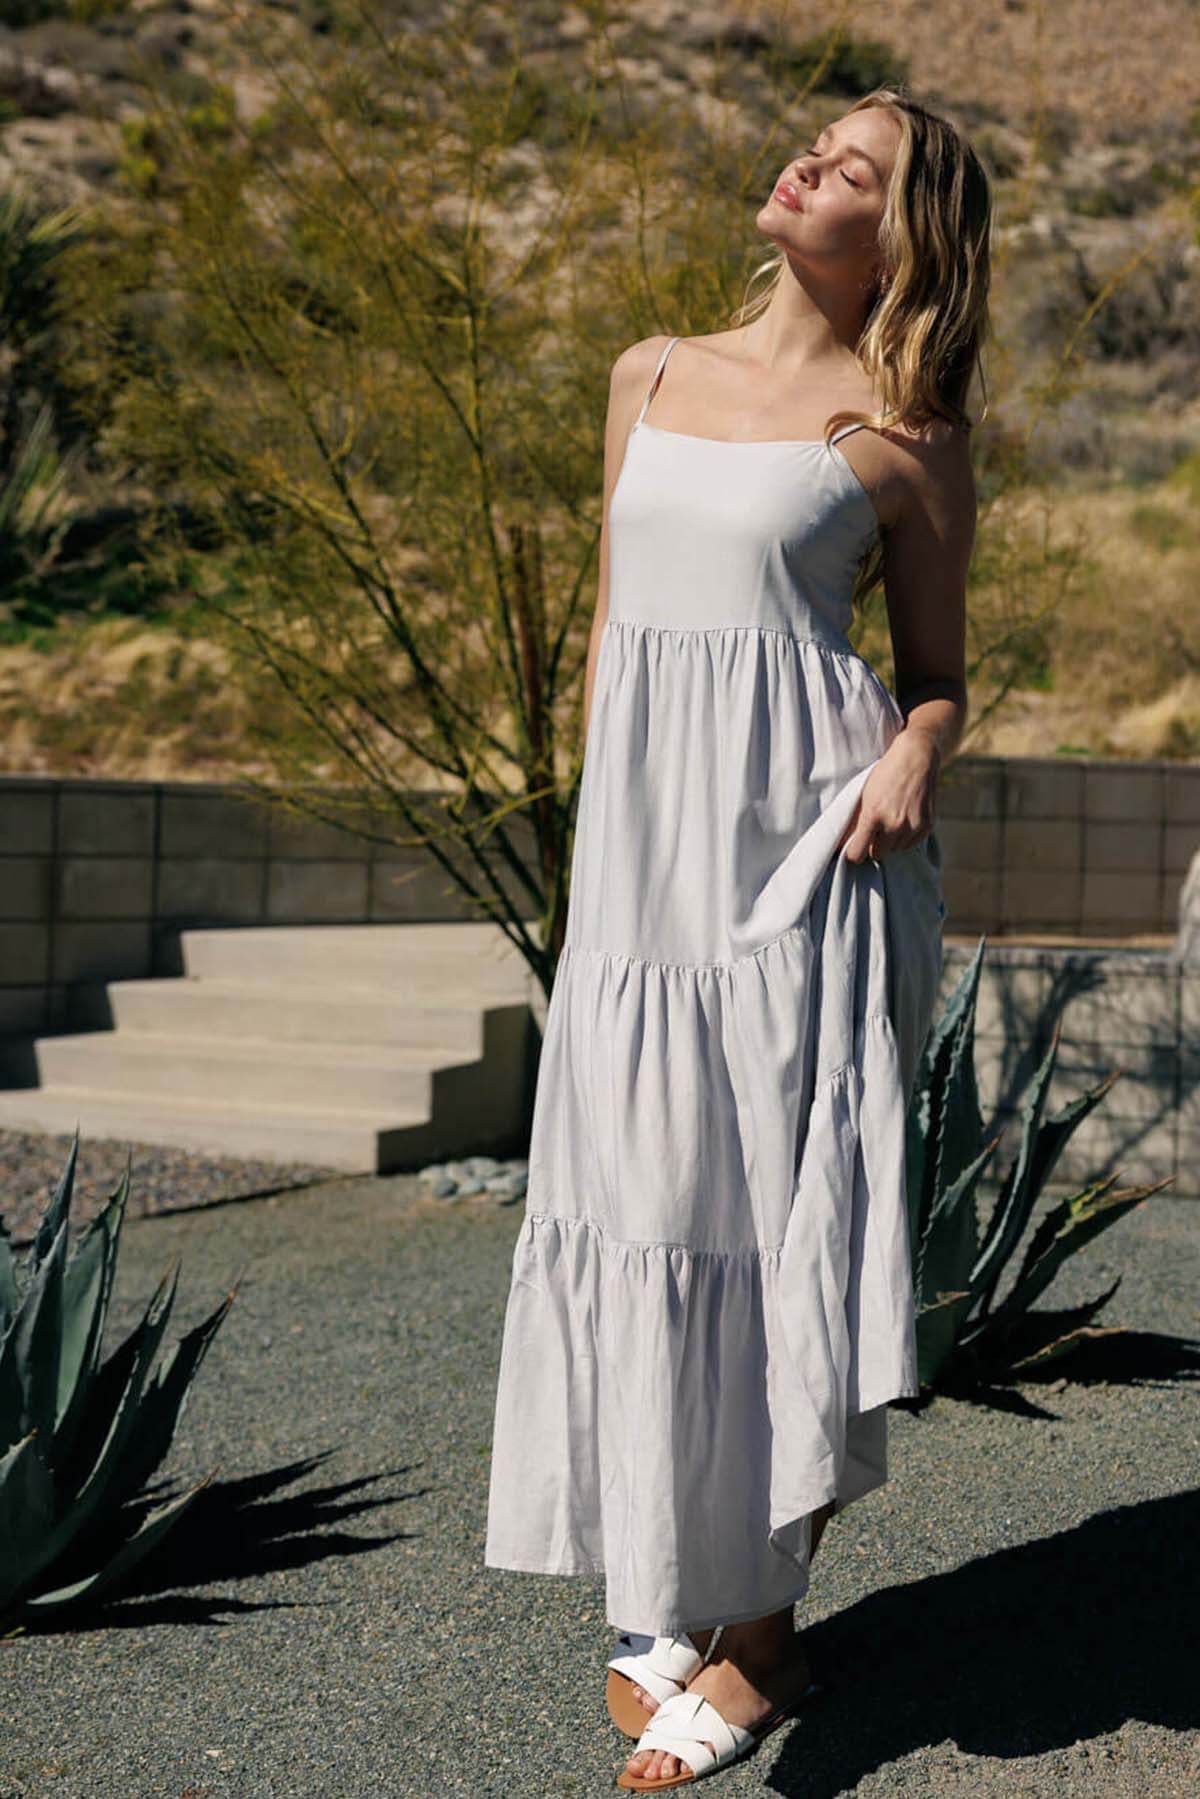 A woman wearing a light gray tiered maxi